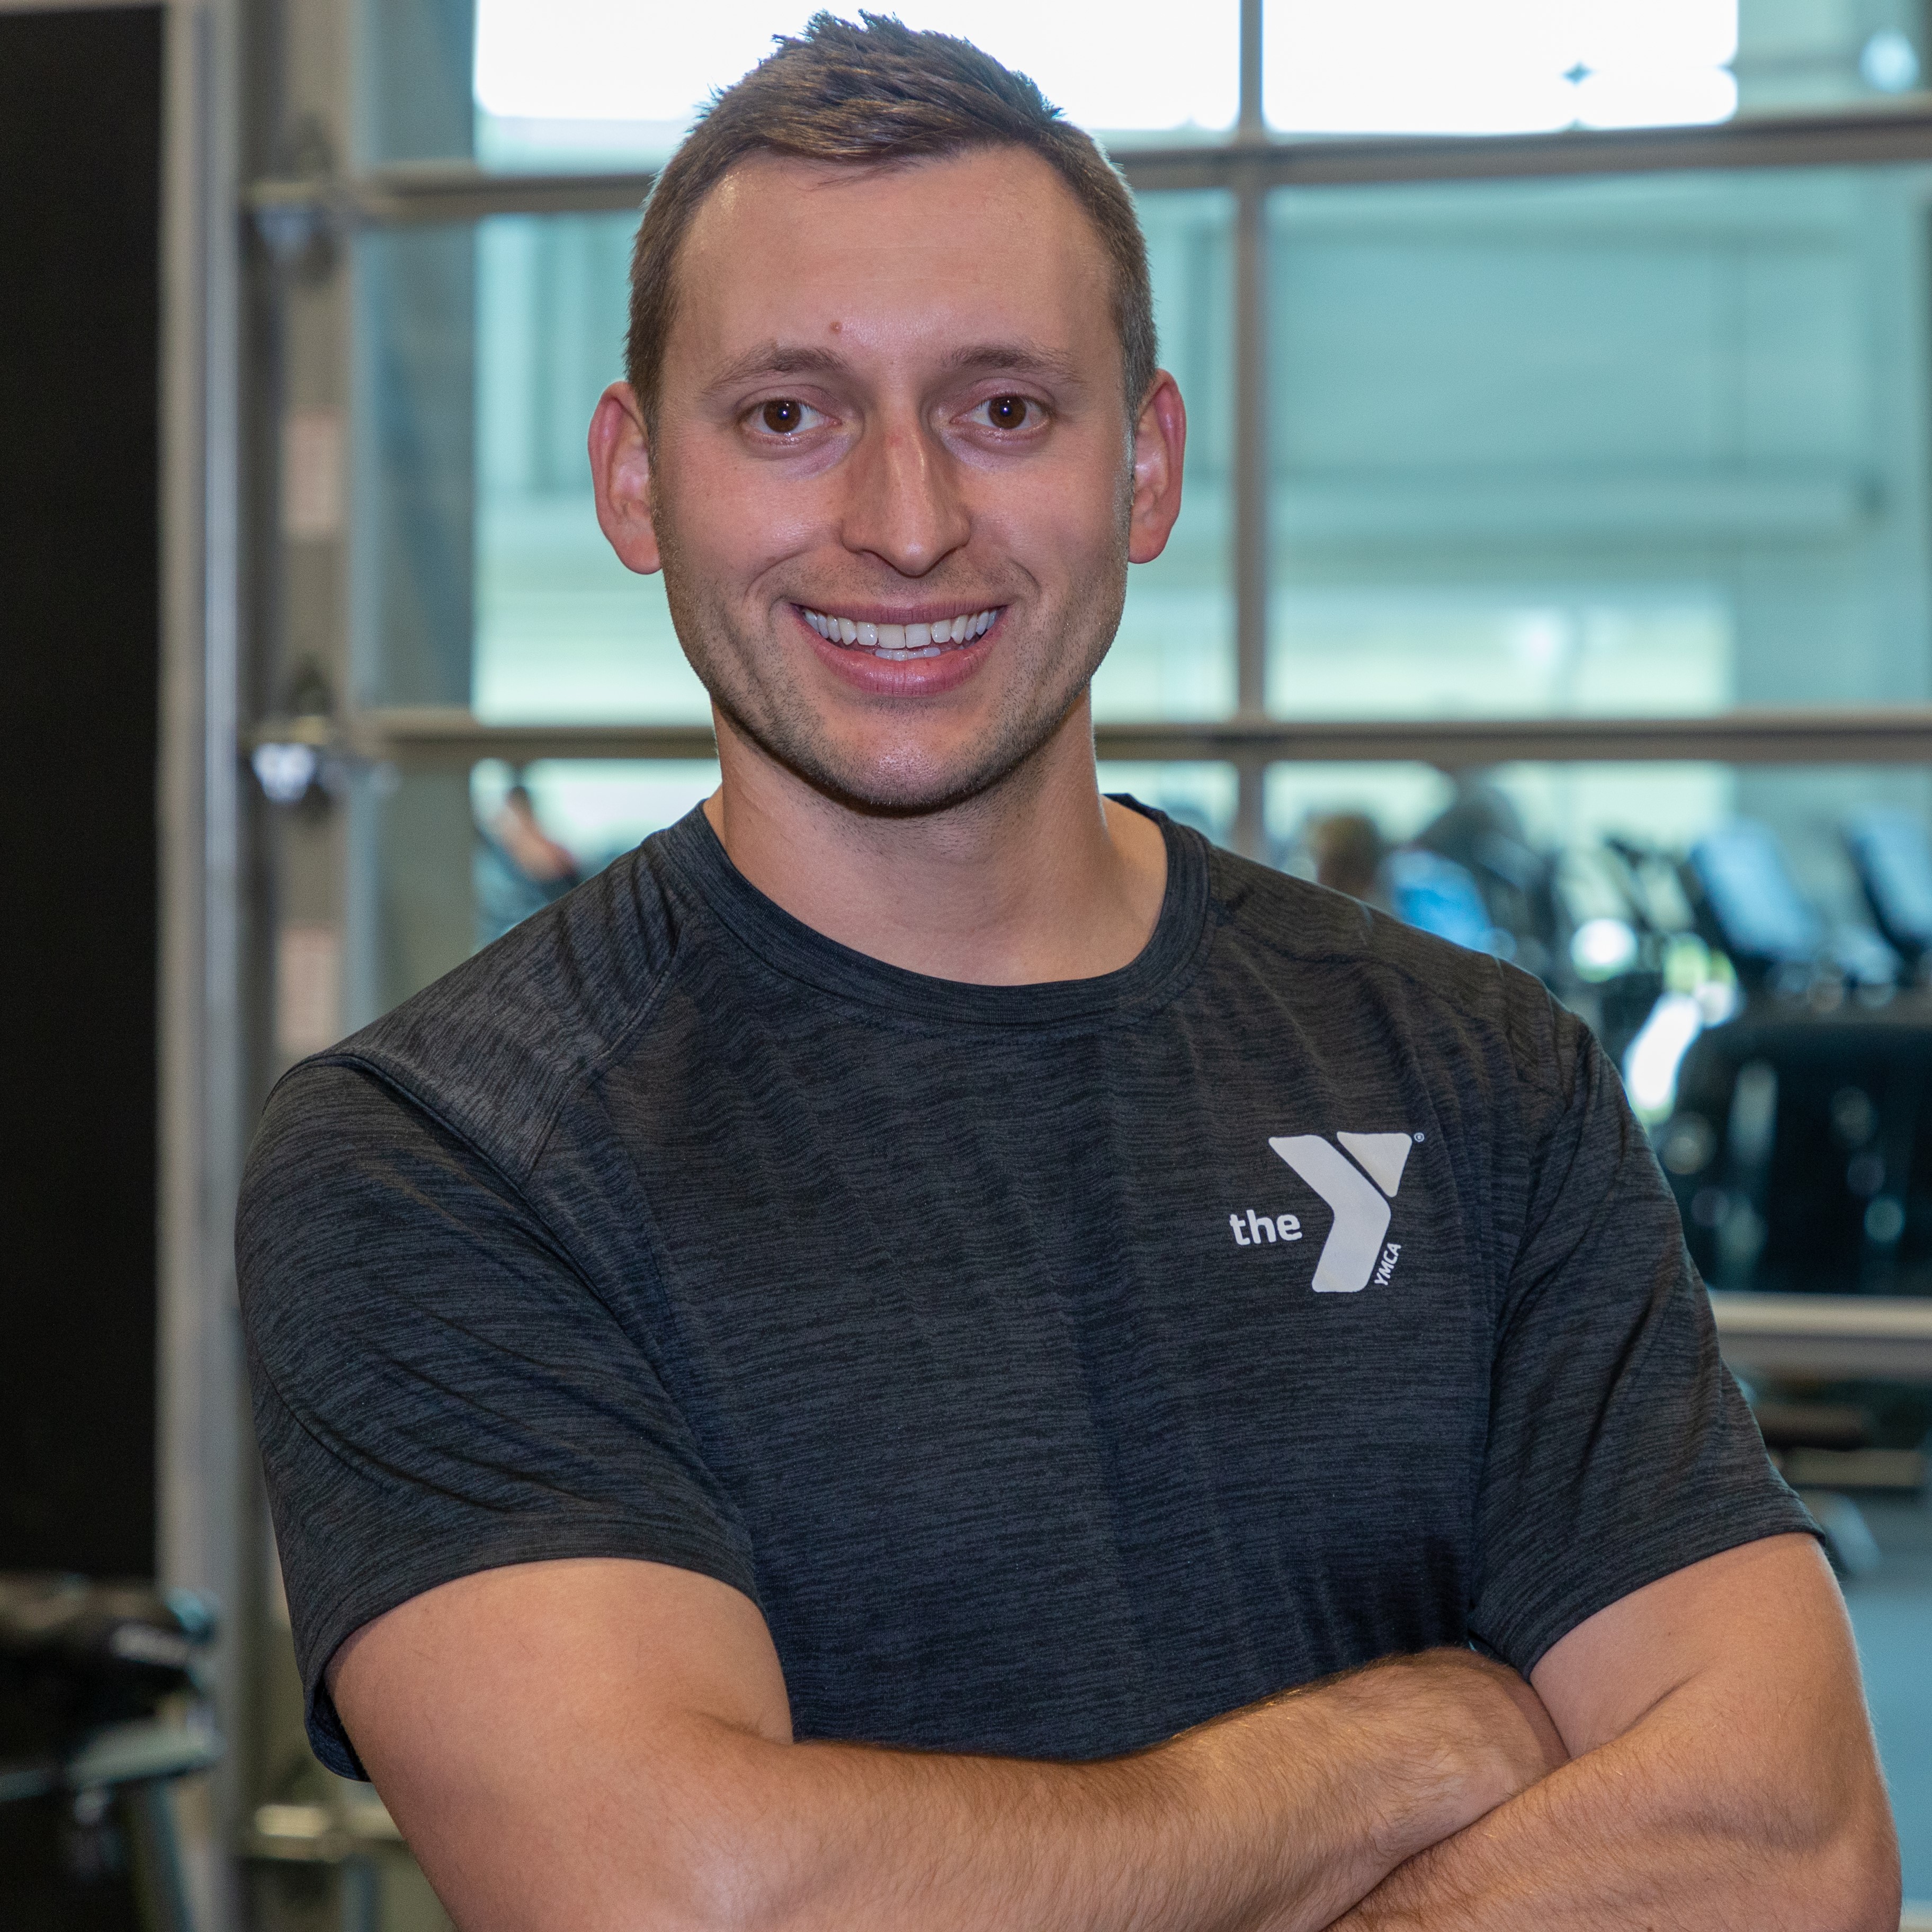 A headshot of Lincoln, Personal Trainer at the Frisco YMCA